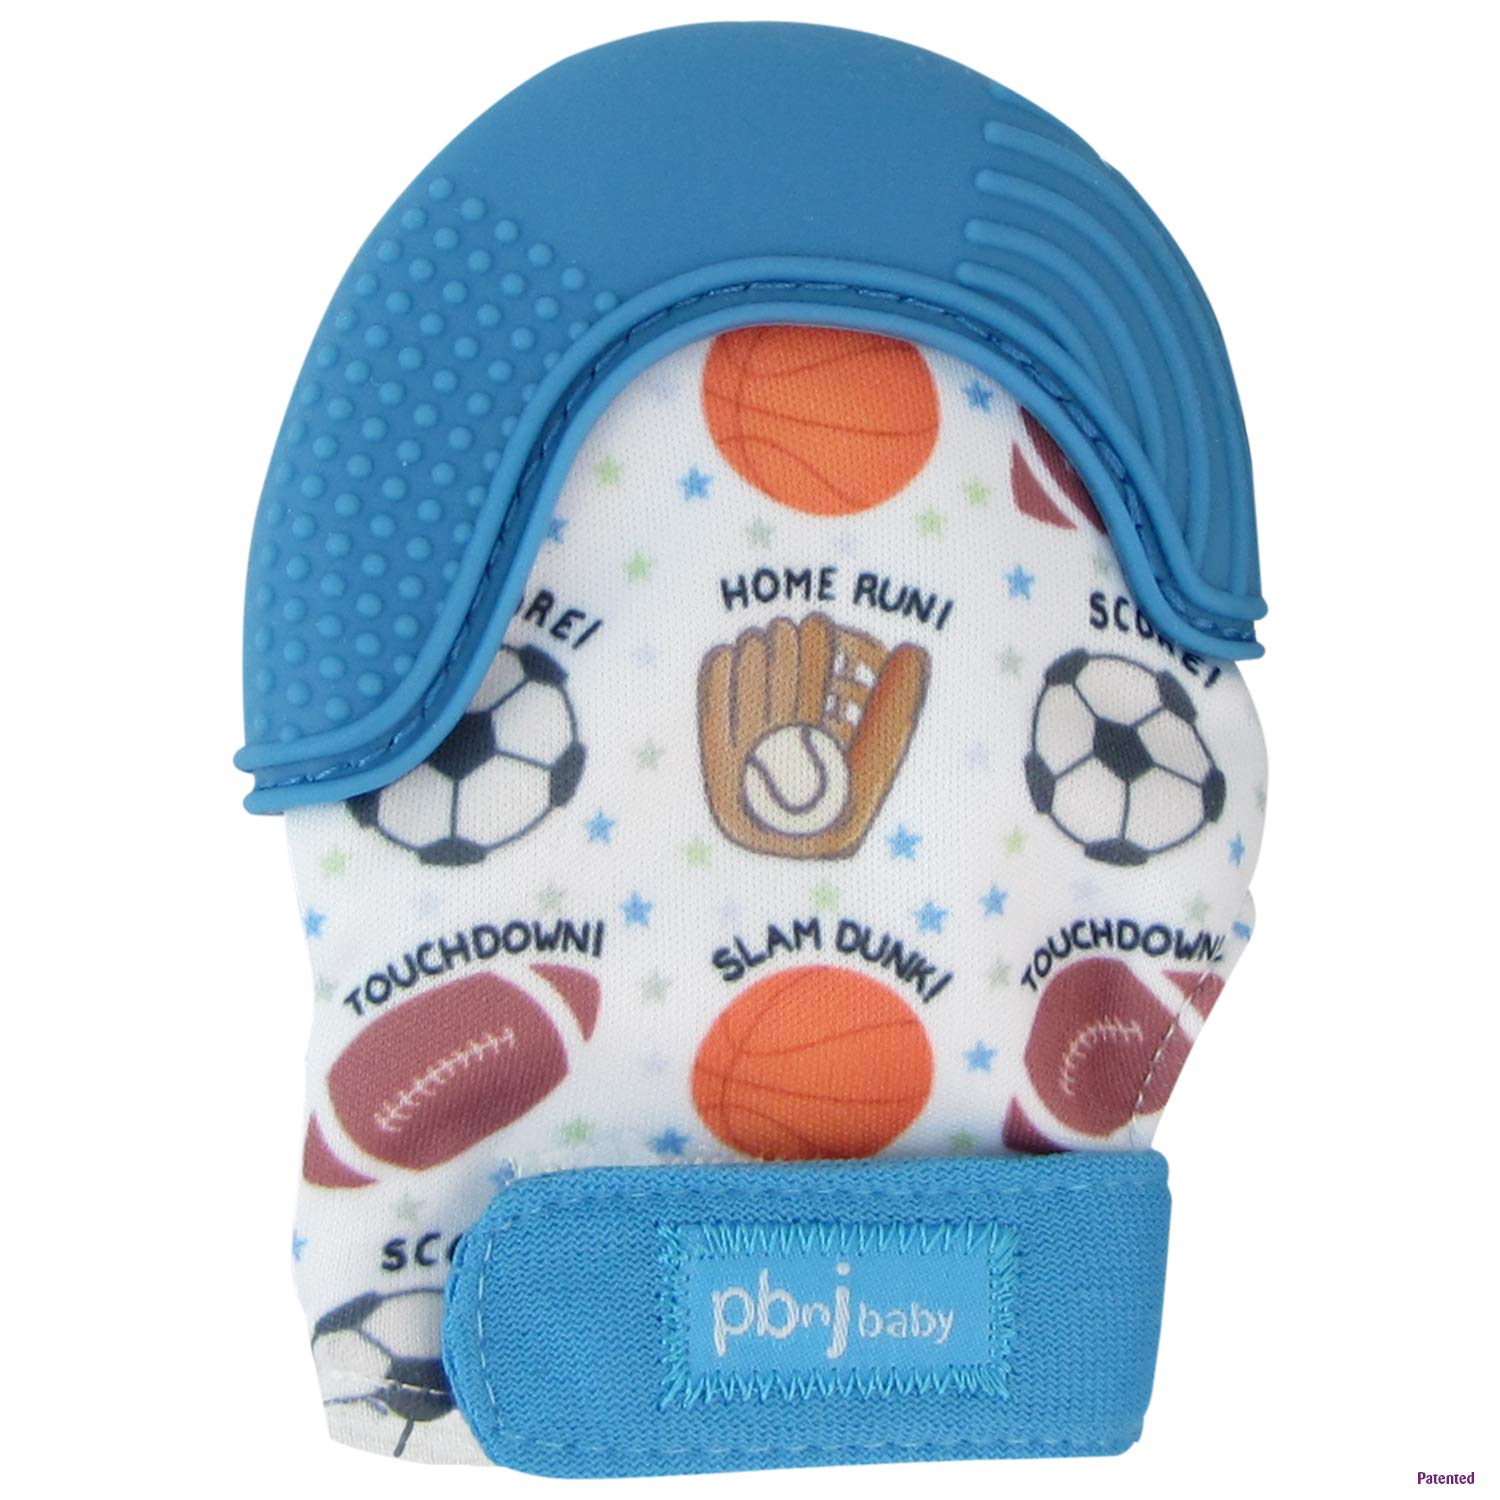 PBnJ baby Silicone Infant Teething Mitten Teether Glove Mitt Toy (Sports)